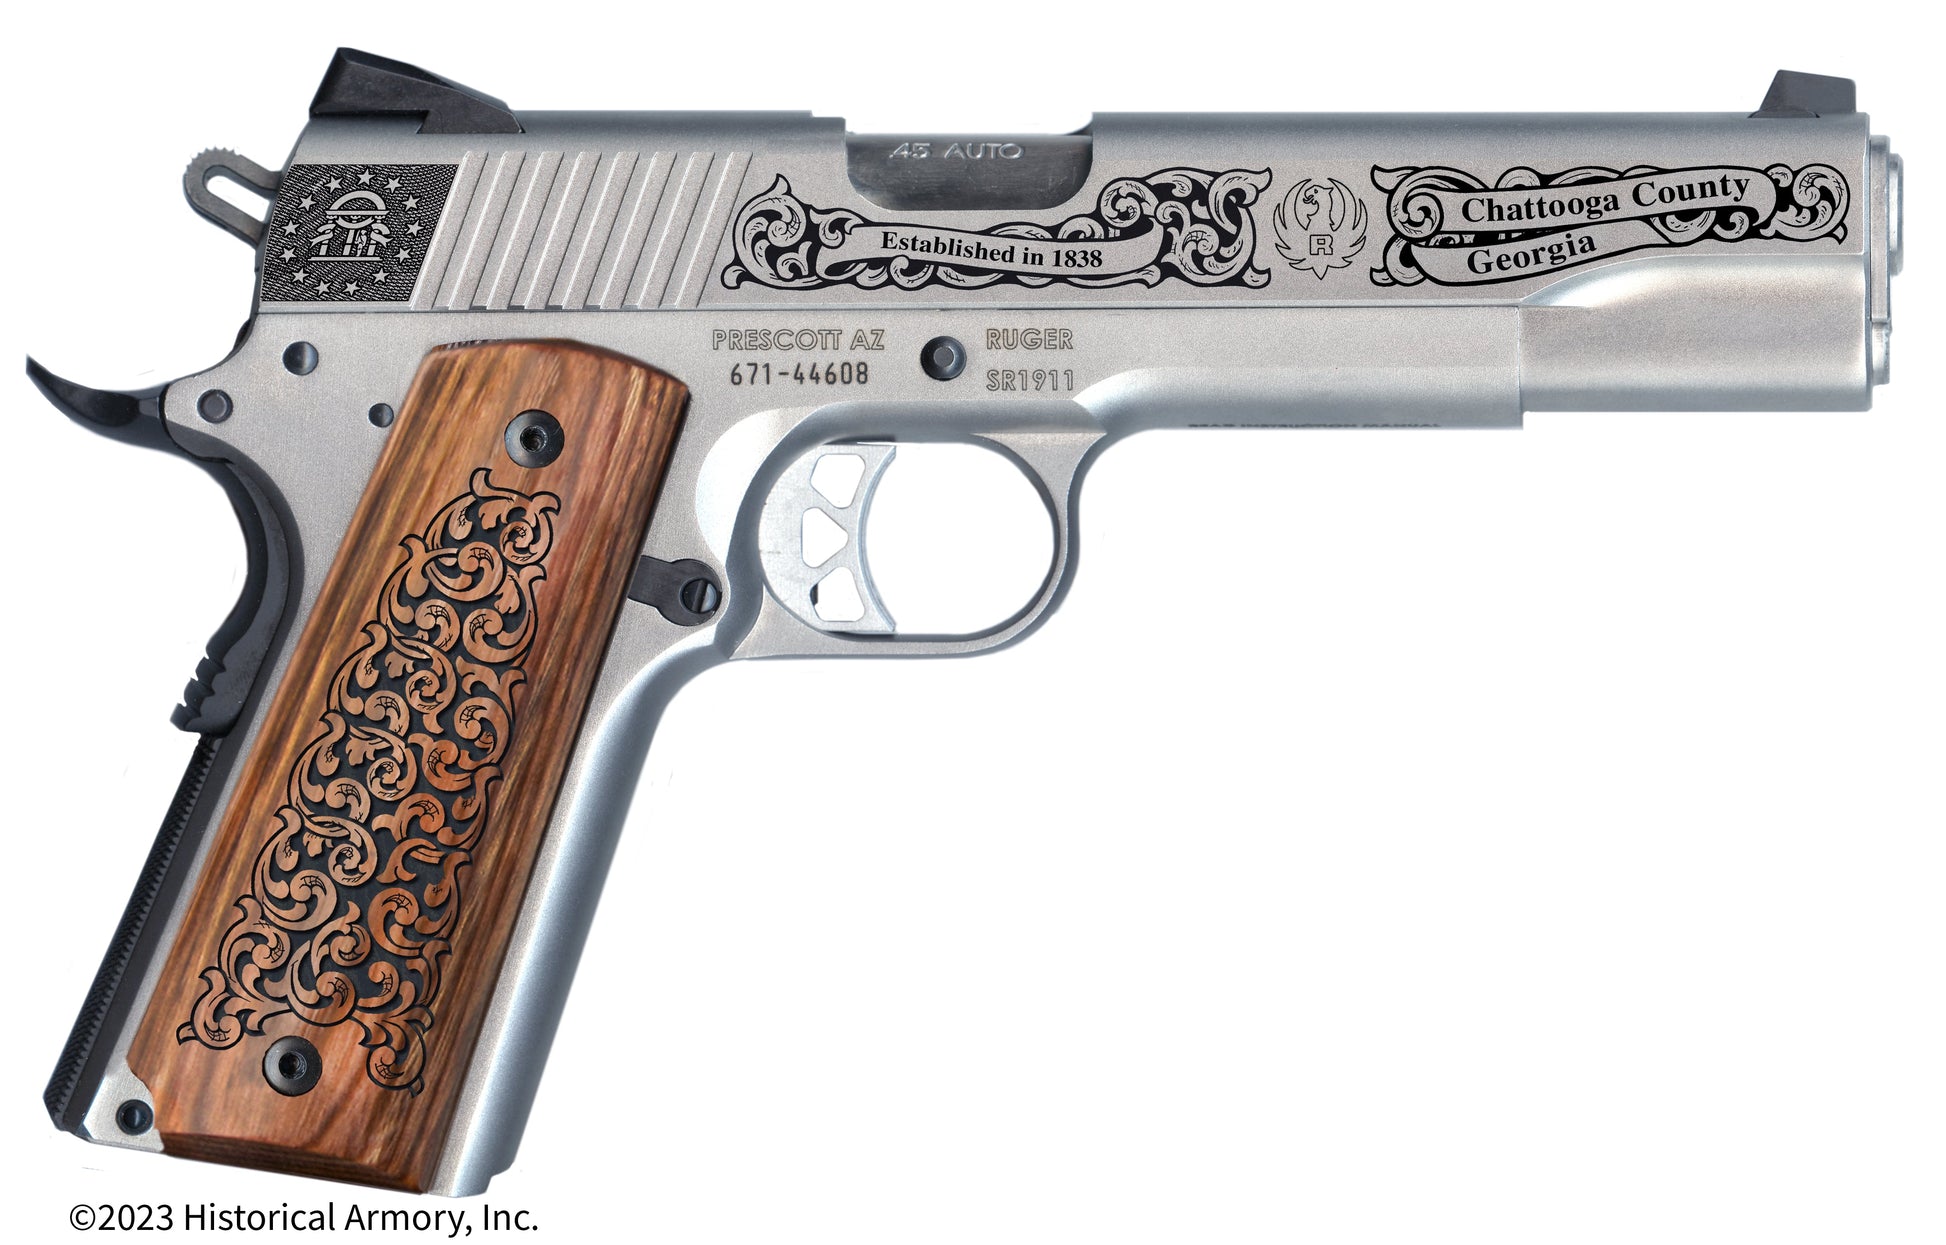 Chattooga County Georgia Engraved .45 Auto Ruger 1911